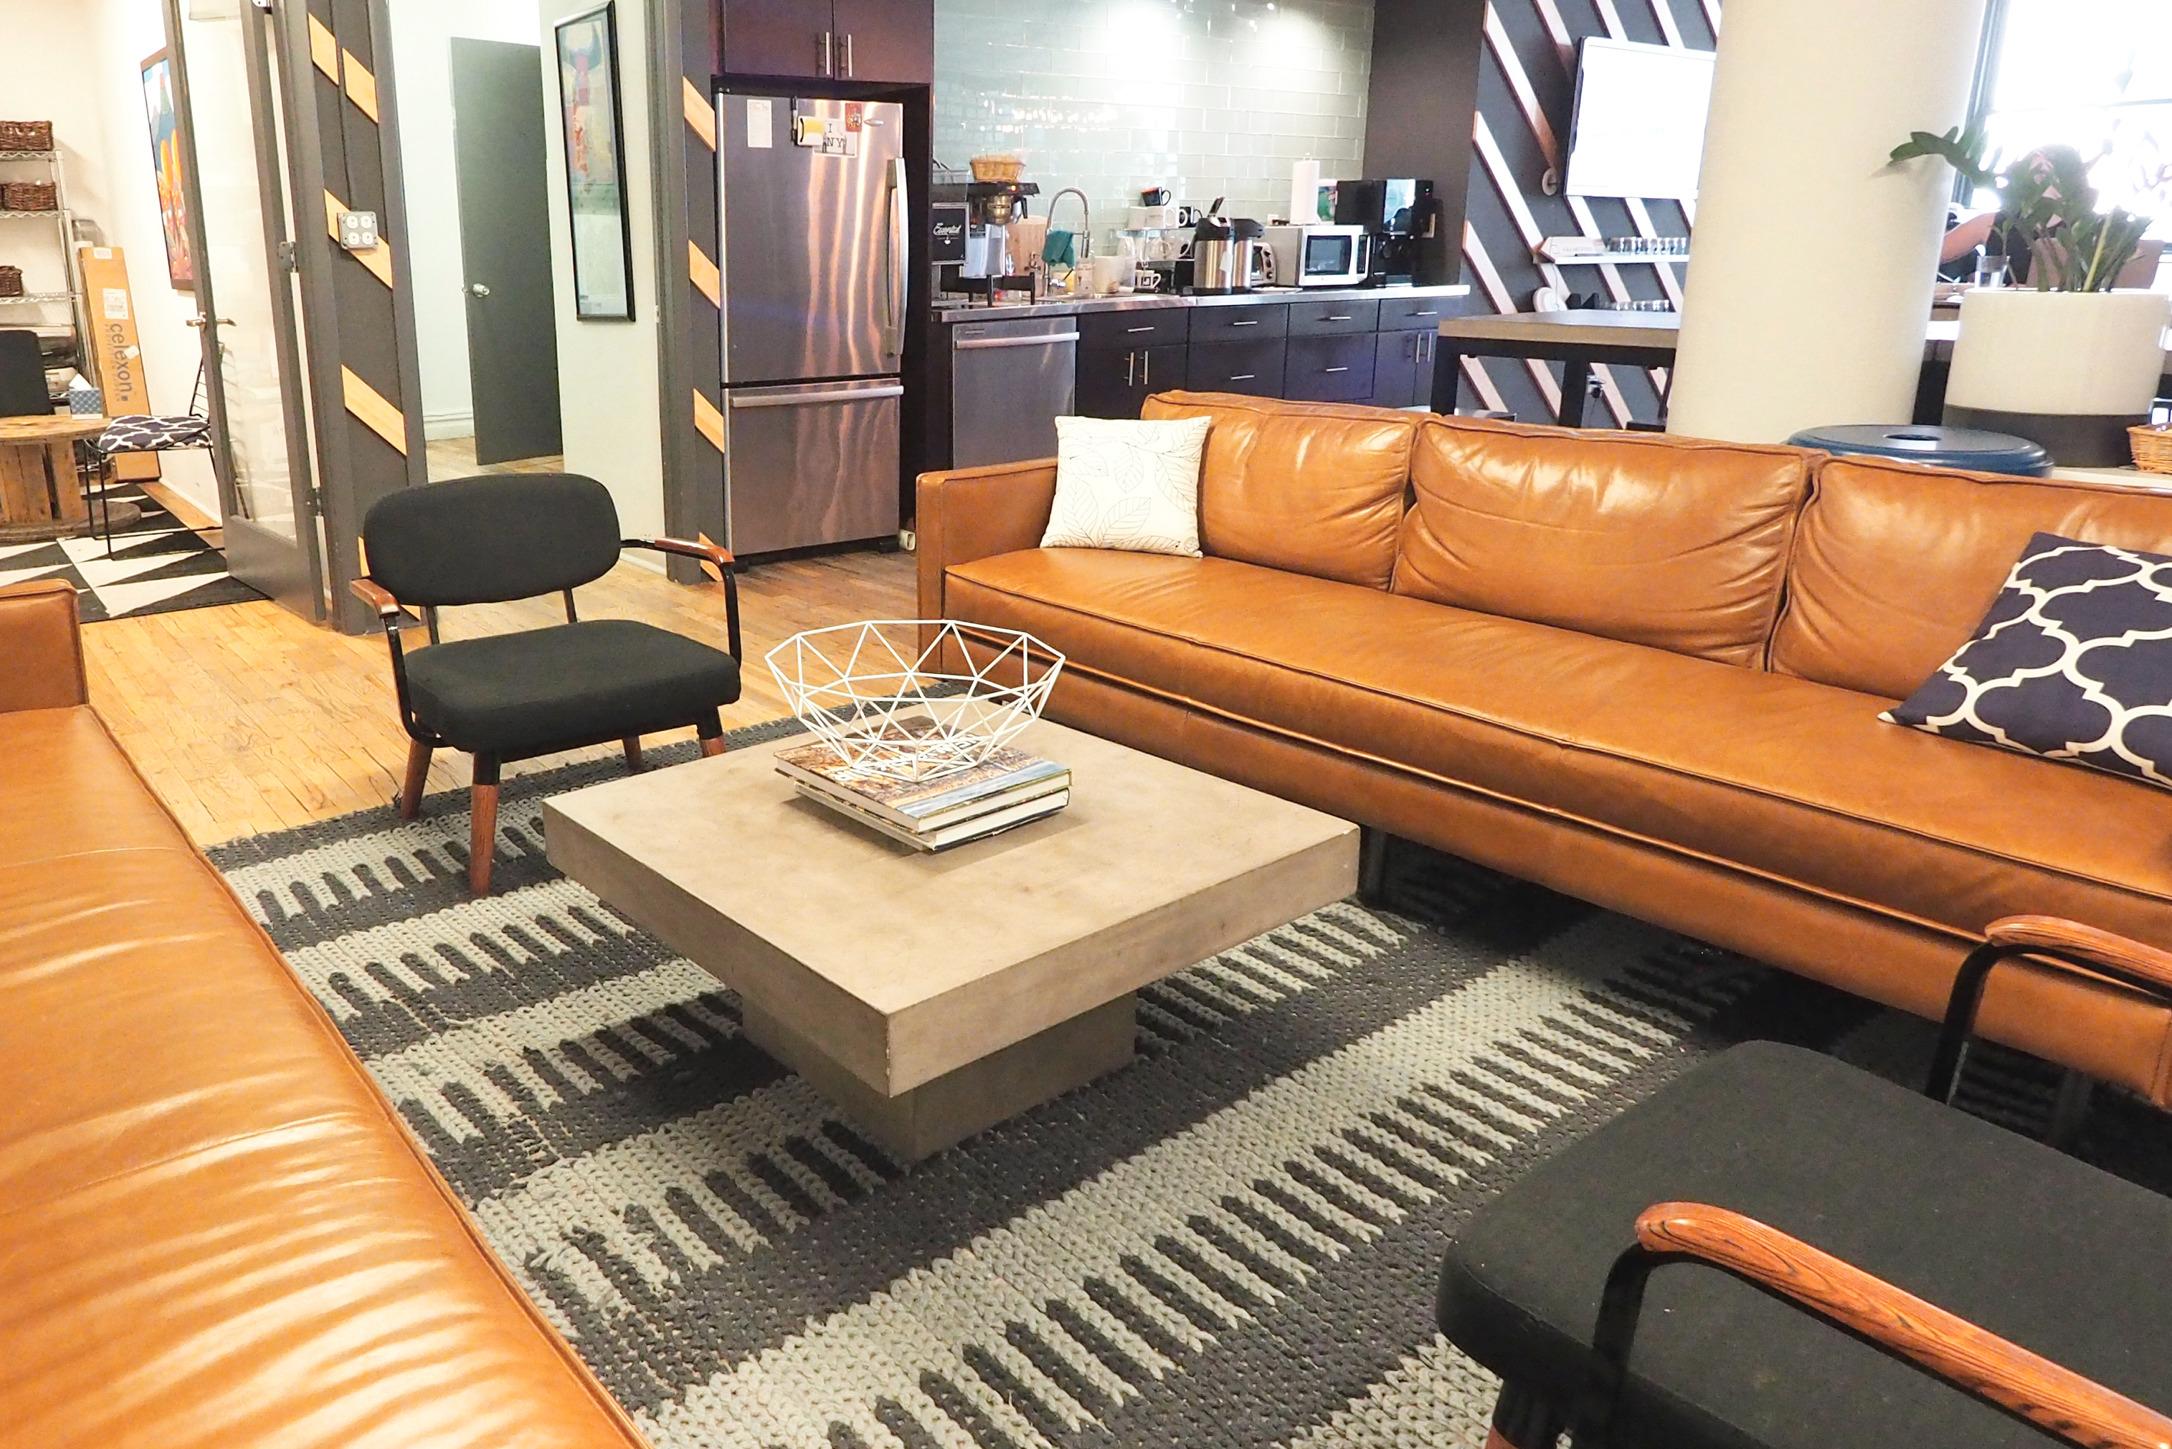 An office lounge area with long leather couch, coffee table, and kitchen in the background